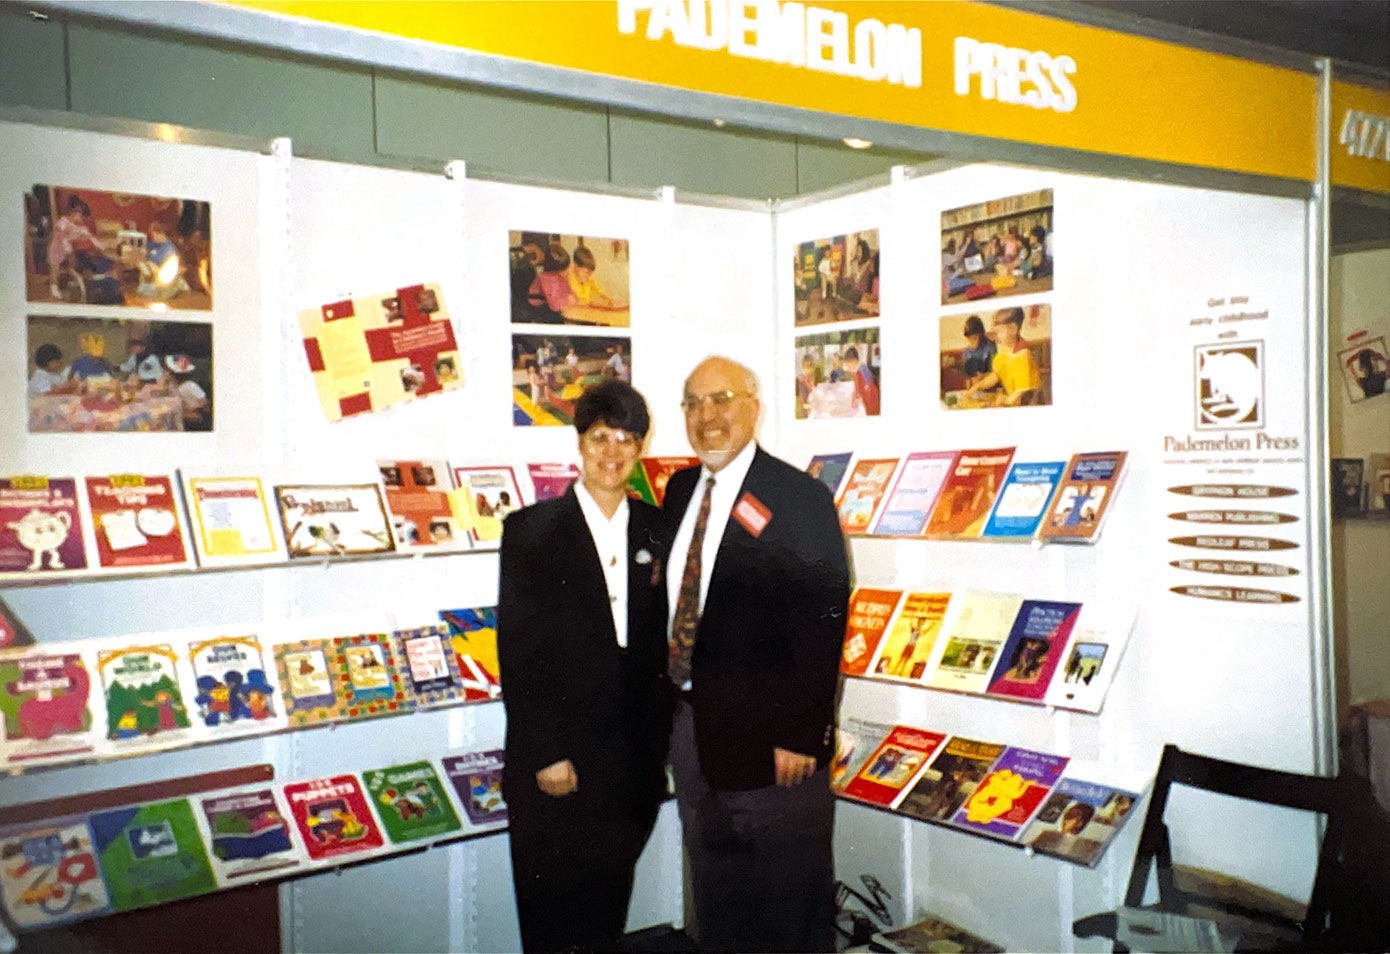 Pademelon Press was created in 1990 by Rodney and Carmel Kenner.